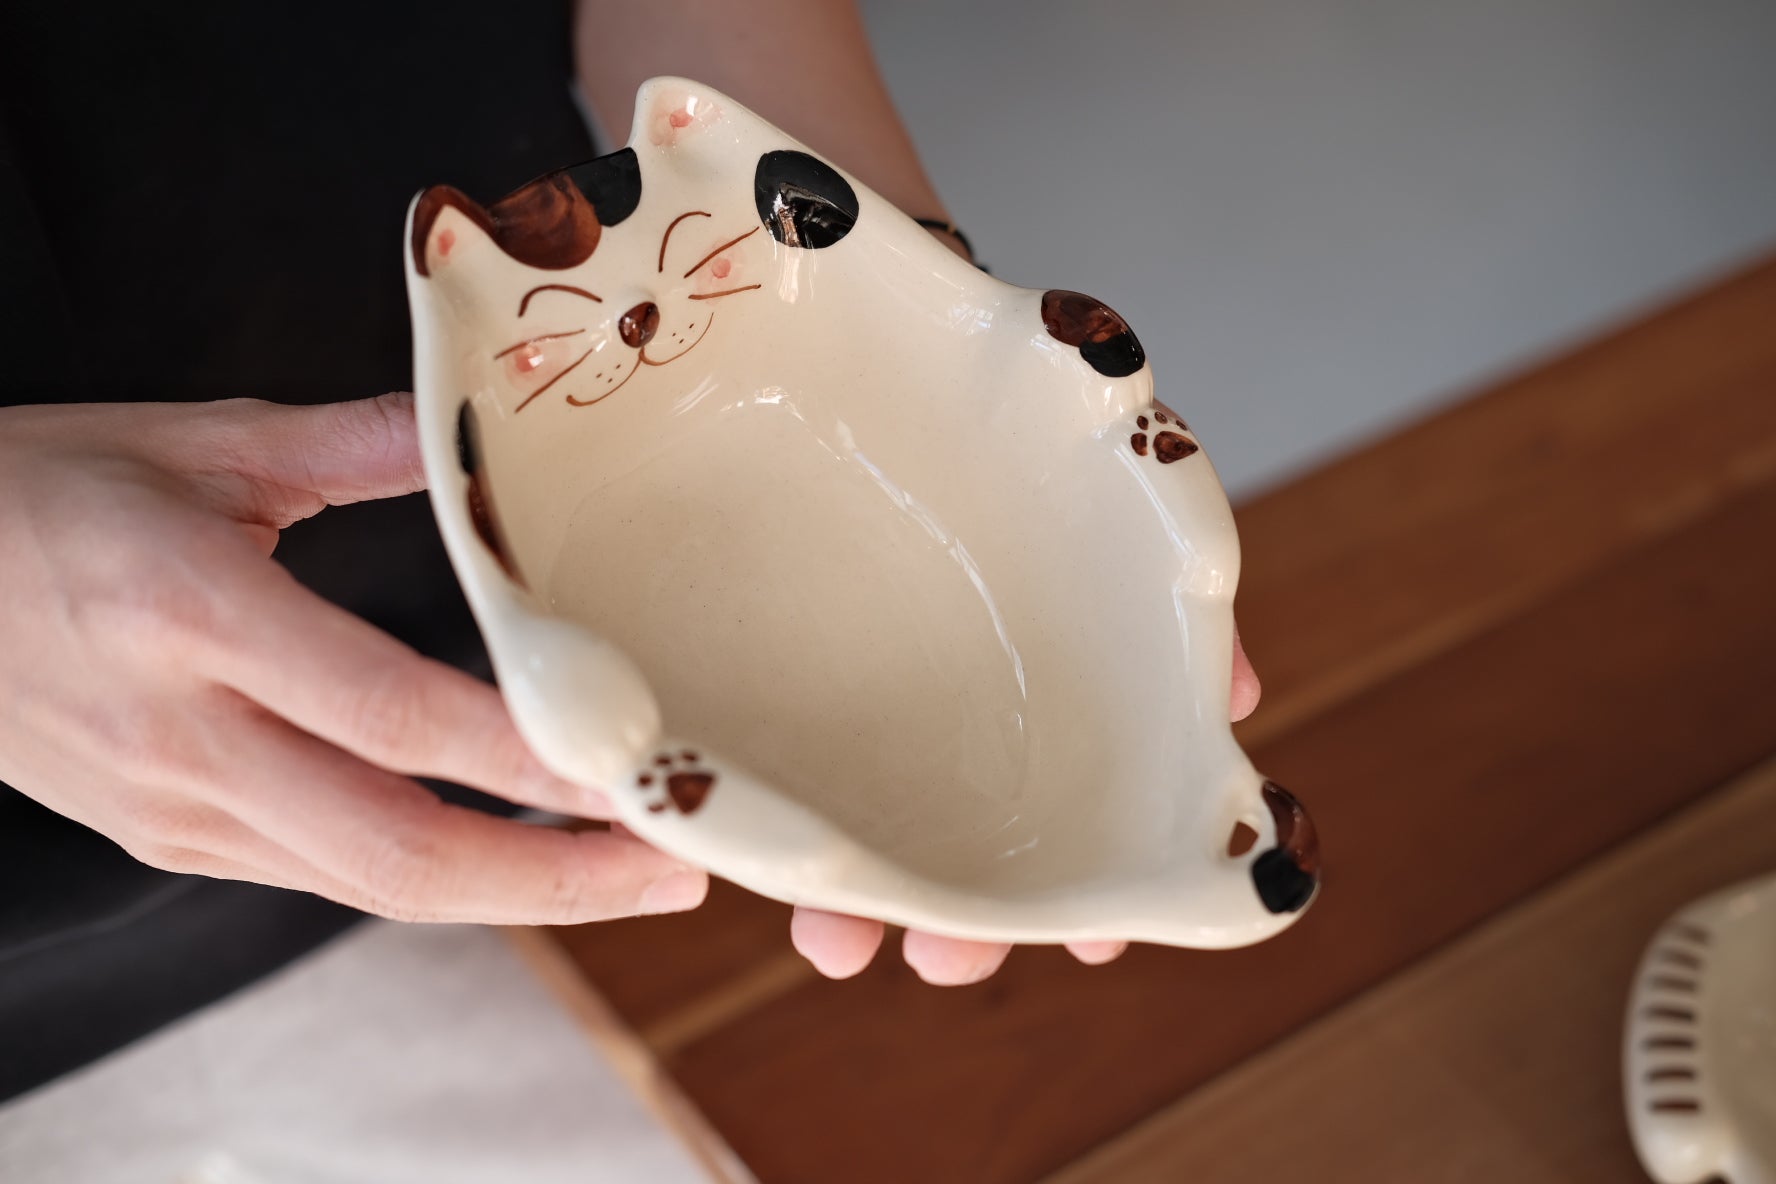 Large Deep Plate and Bowl - Cat